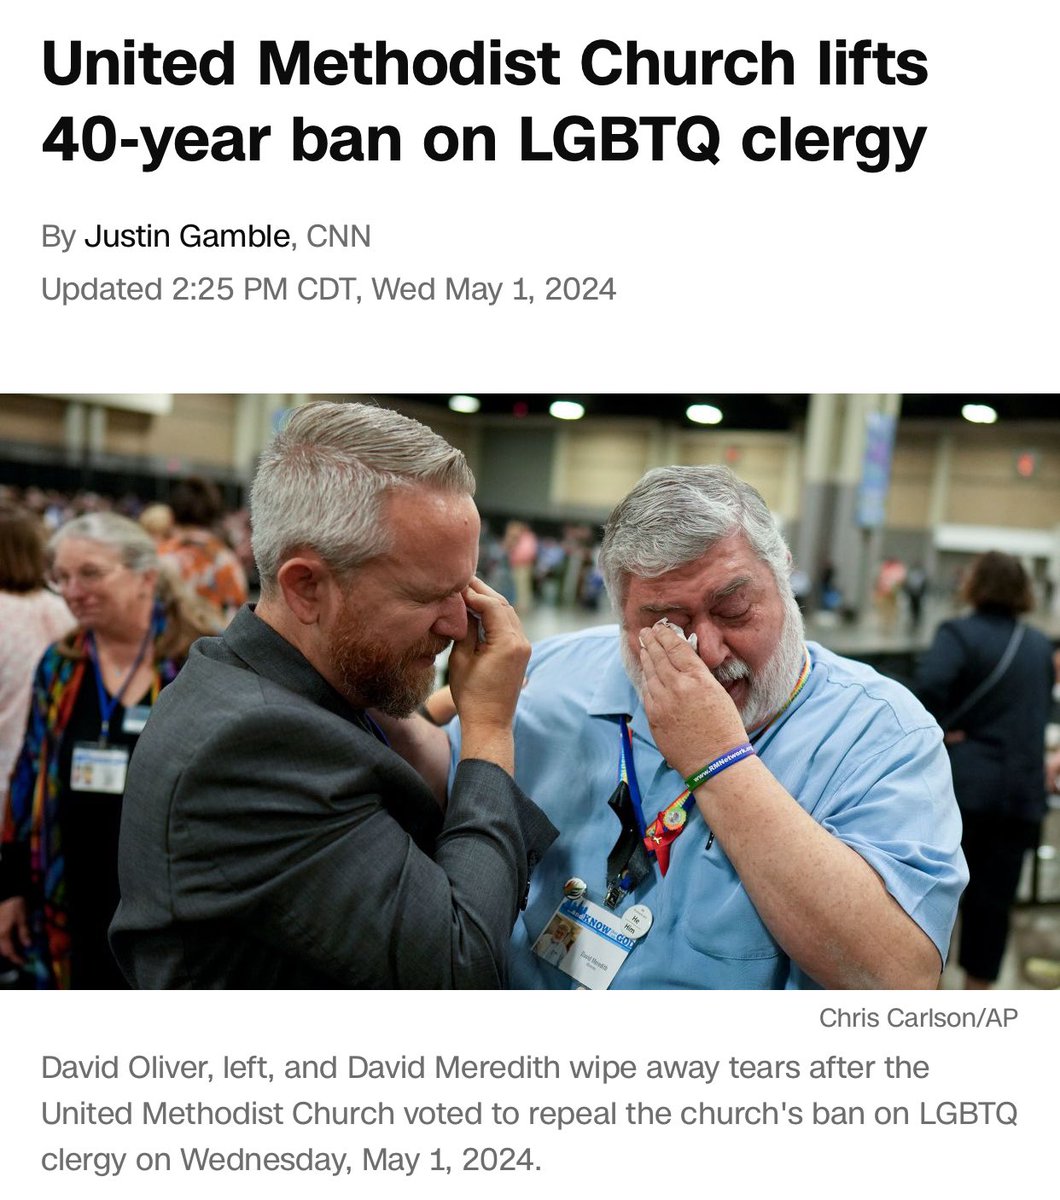 ICYMI— “The United Methodist Church overturned its 40-year ban on gay clergy, a historic shift in the church’s stance on homosexuality… The church has long been divided into factions over 🏳️‍🌈 inclusion, weighed splitting into 2  separate churches over it.” cnn.com/2024/05/01/us/…